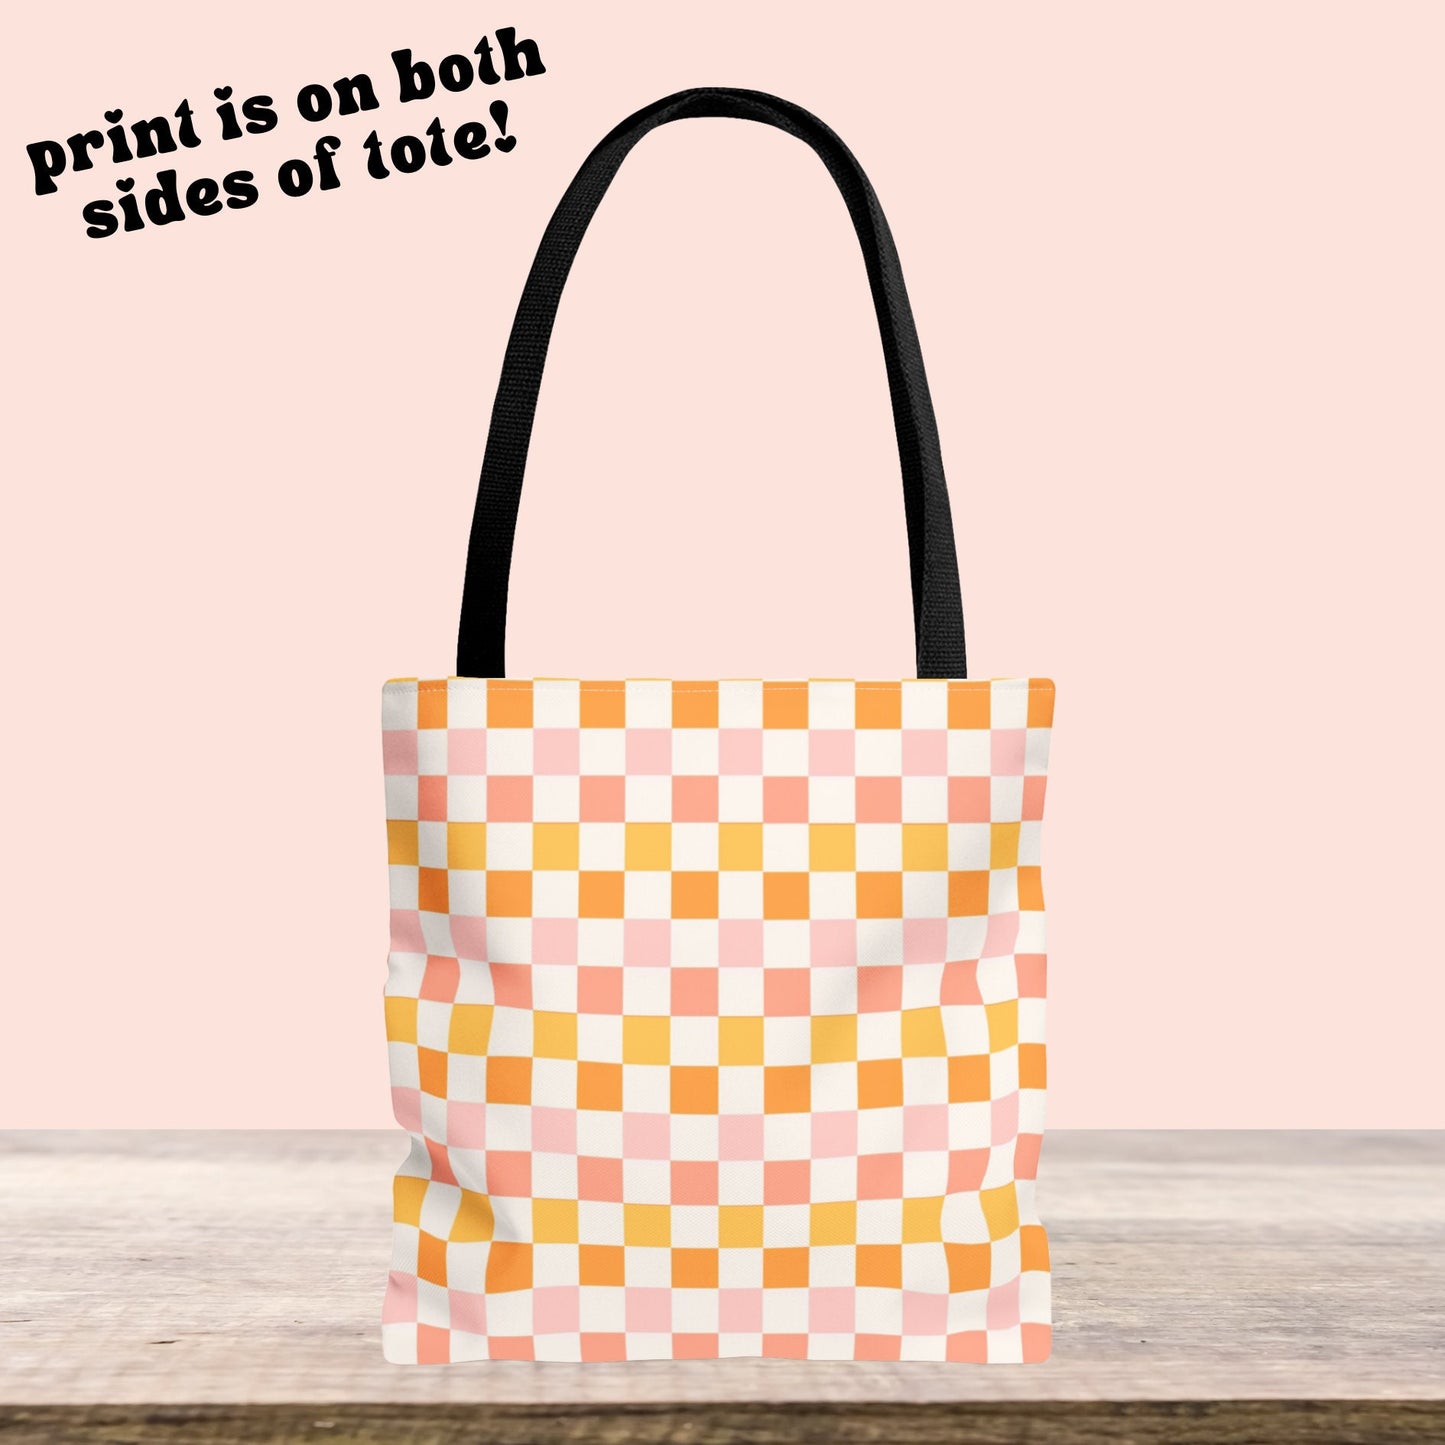 Pink Beach Checkered Tote Bag - Nautical Tote - Beach Vacation Bag - Ocean Aesthetic - Pink Checkered Summer - Double Sided Beach Tote Bag